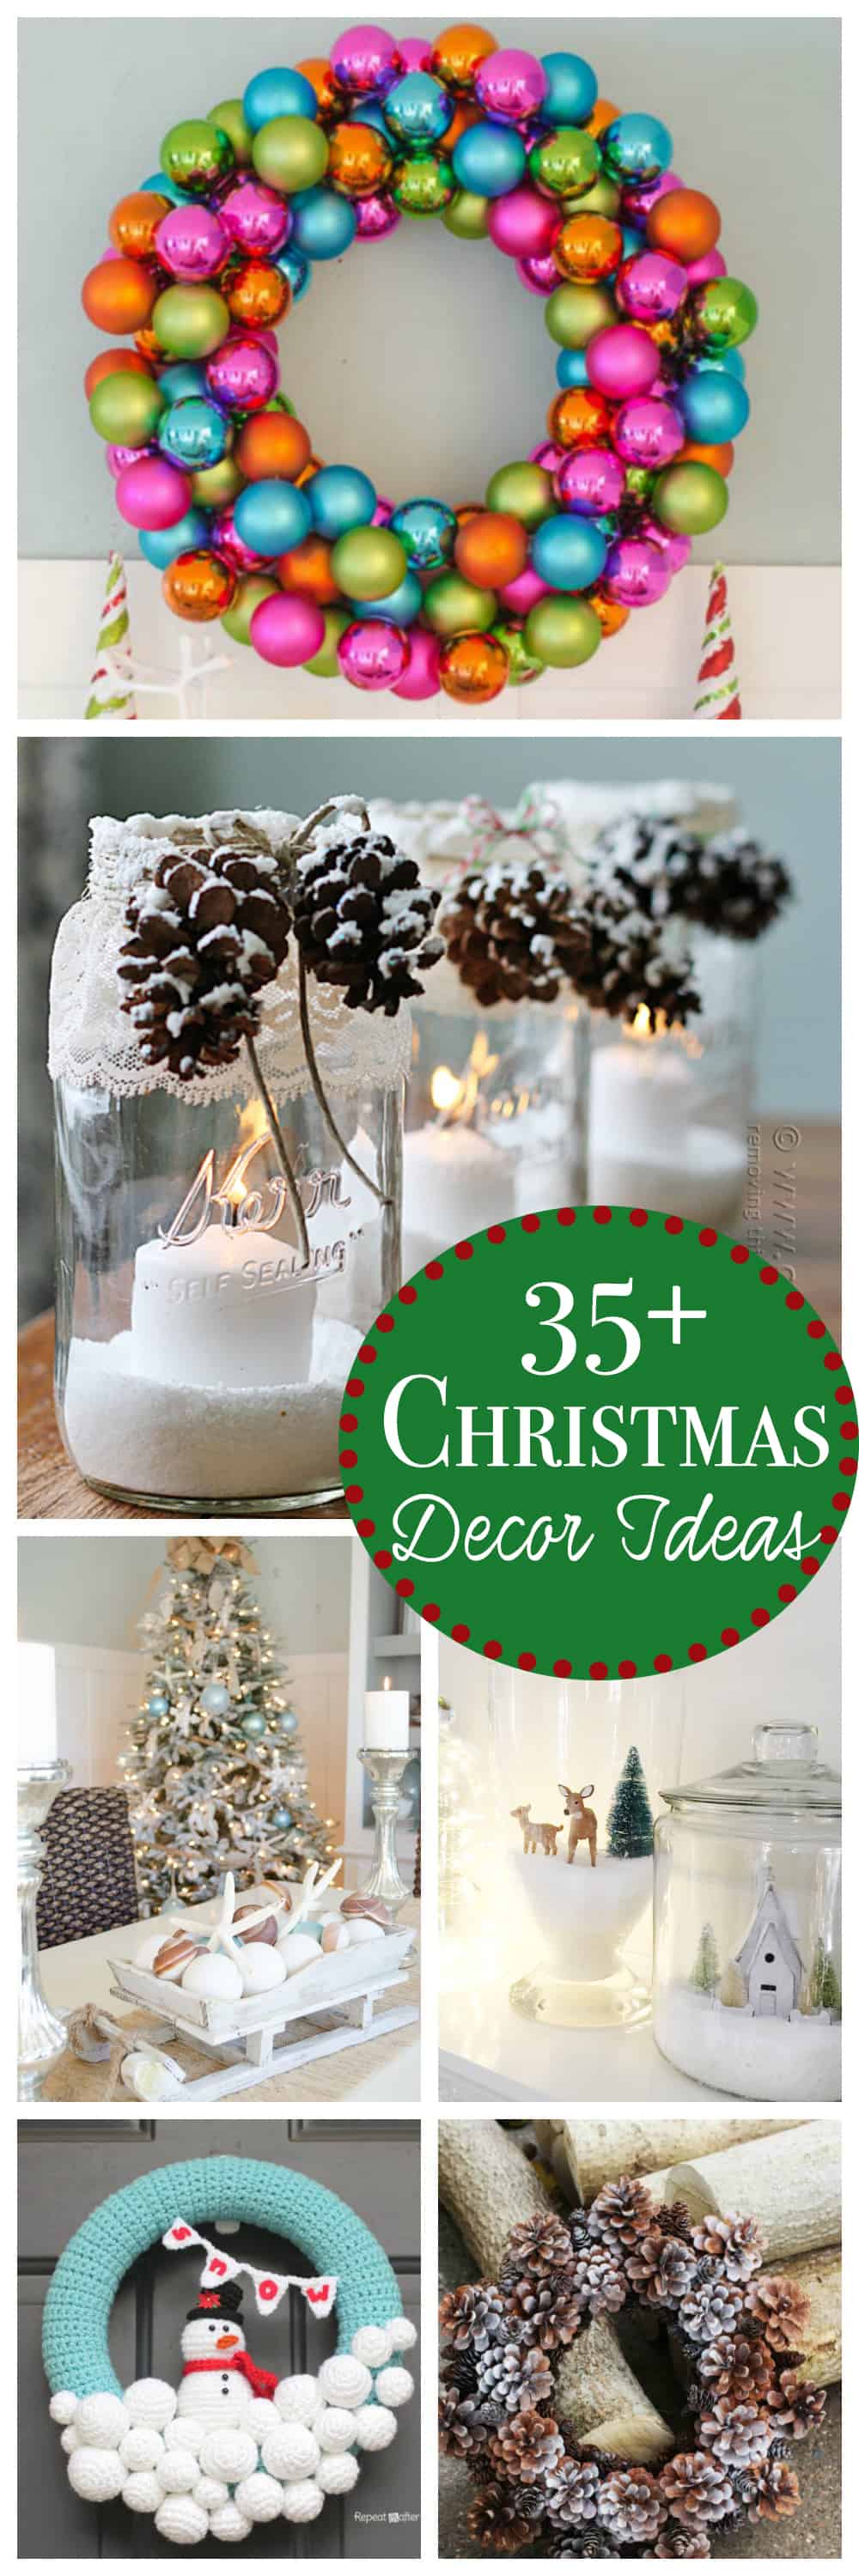 Decorating your home for Christmas is one of the best parts of the holiday season. Here are 35 Christmas decor ideas to get you started.